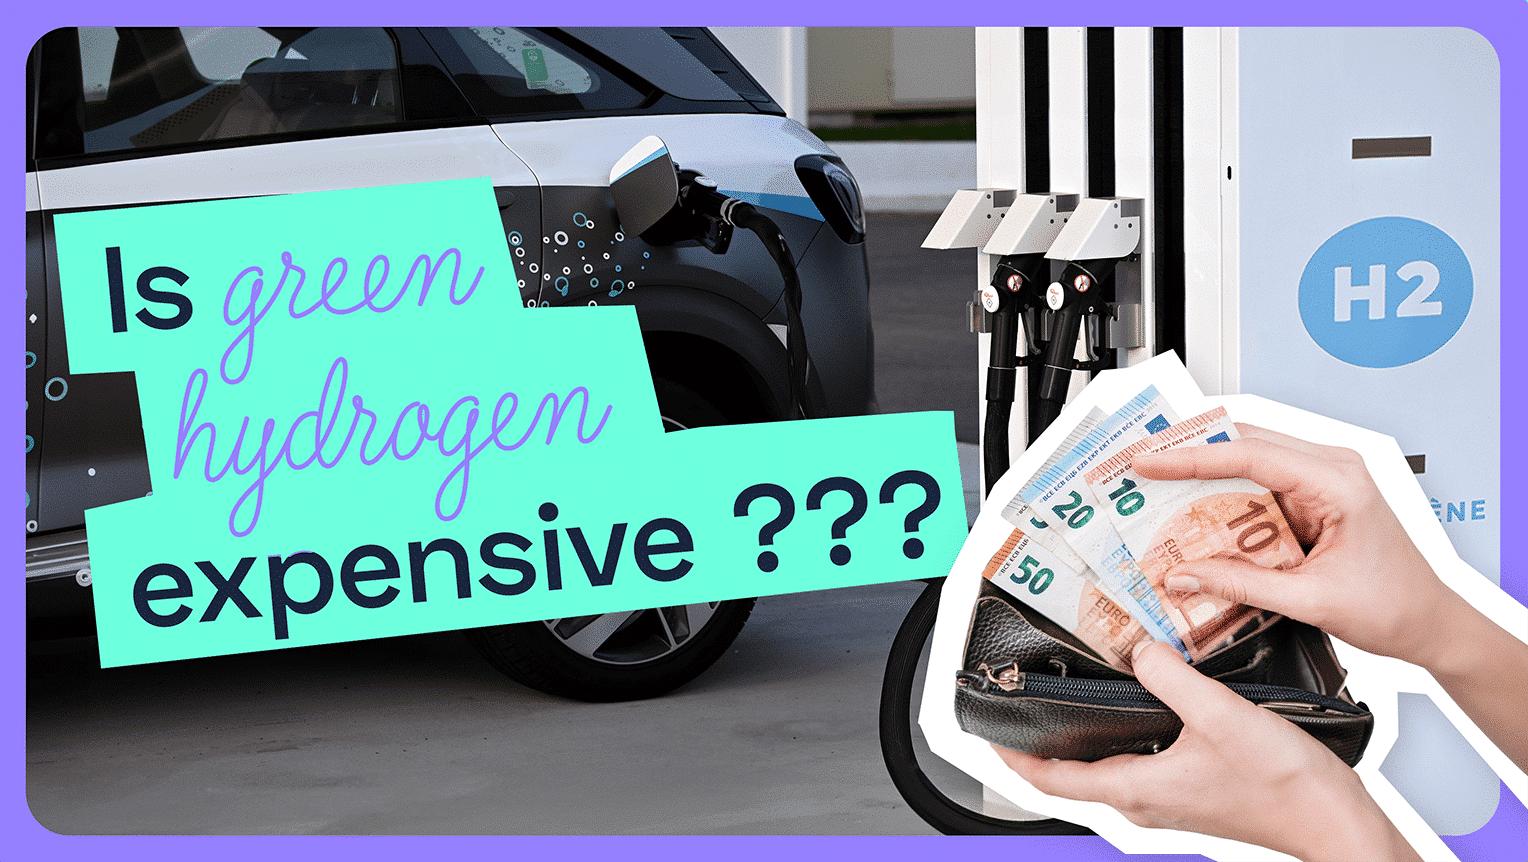 Price of hydrogen - A full tank of hydrogen costs around €70, so it's cheaper than a full tank of petrol. Hello, I'm Matthieu Guesné, CEO of Lhyfe, and I'm going to talk to you about hydrogen. A full tank of hydrogen will run you 700 km for roughly €60 to €70. That's what we can afford today. Since we can produce it competitively, we can connect directly to renewable energies and then install plants that will enable us to achieve economies of scale quickly enough to produce it centrally and then distribute it to points of consumption. If we build large enough plants, we can produce hydrogen at a competitive price and deliver it to a large number of service stations. A large city like Paris, like Toulouse, can very easily afford its own hydrogen production unit. But what we're doing at Lhyfe is avoiding this ecological divide by producing our hydrogen centrally but regionally. One production site per region to supply everyone in the region. You have 411 service stations on motorway service areas, and a hydrogen station costs roughly one million euros, which means that for 400 million euros you could have a complete network of service stations in France. But in fact, out of a 9 billion French plan, it's nothing at all, so it's fast and it's cheap.